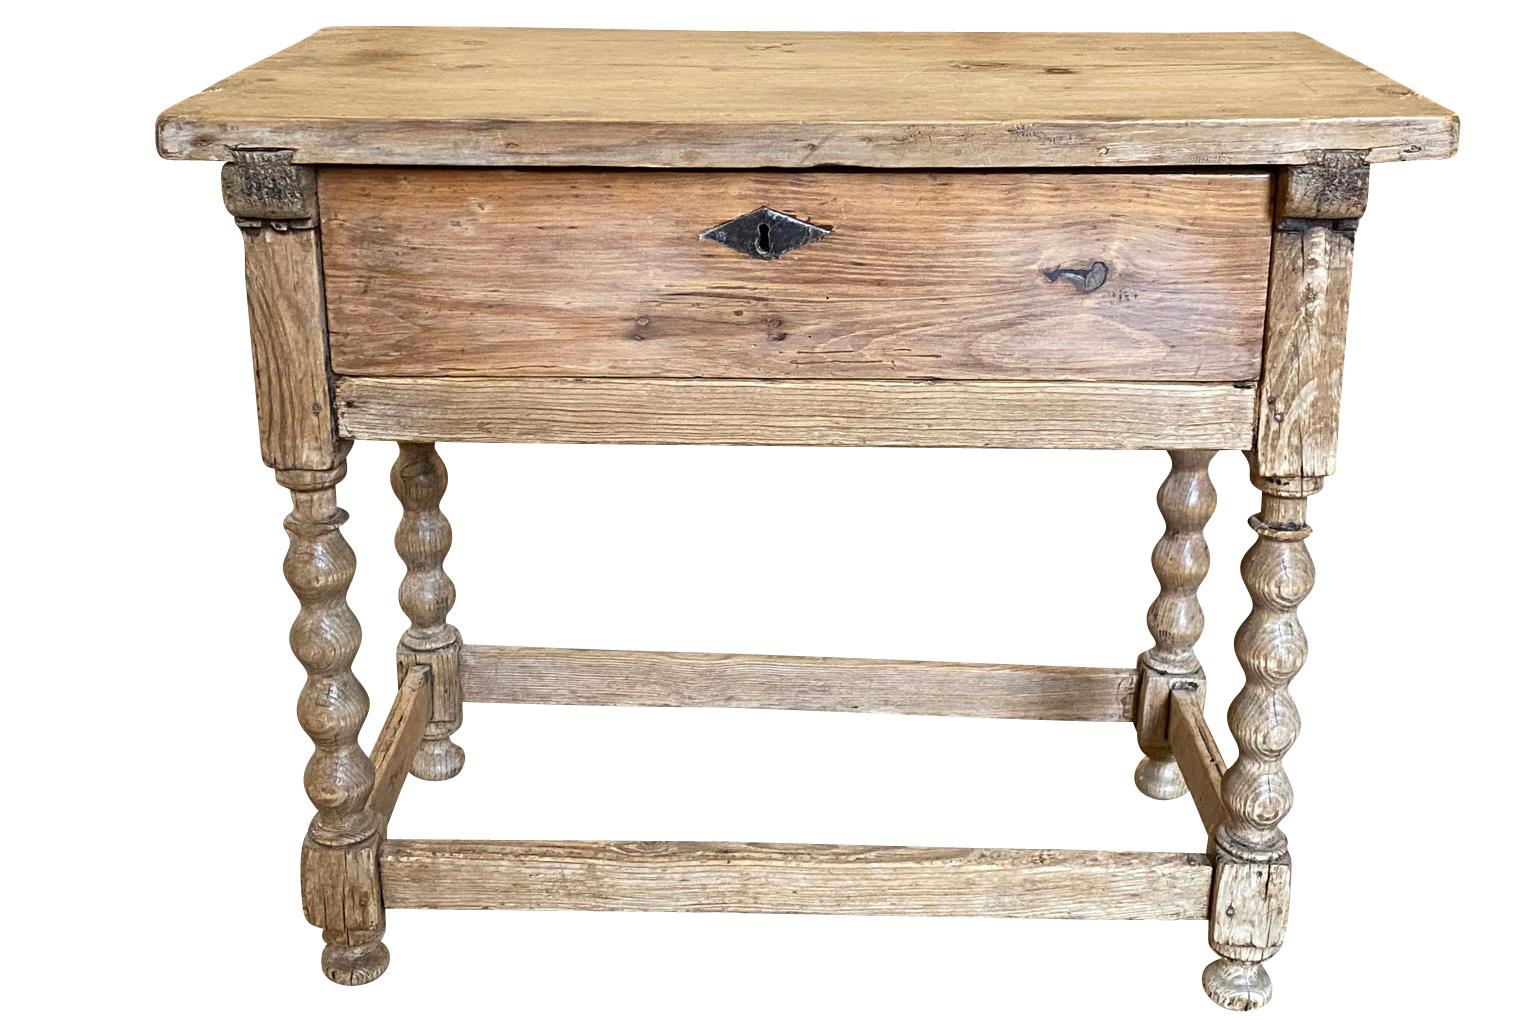 A very handsome primitive 18th century side table - console from the Catalan region of Spain. Soundly constructed from beautifully patina'd meleze - hard pine with one large drawer and beautifully turned legs.